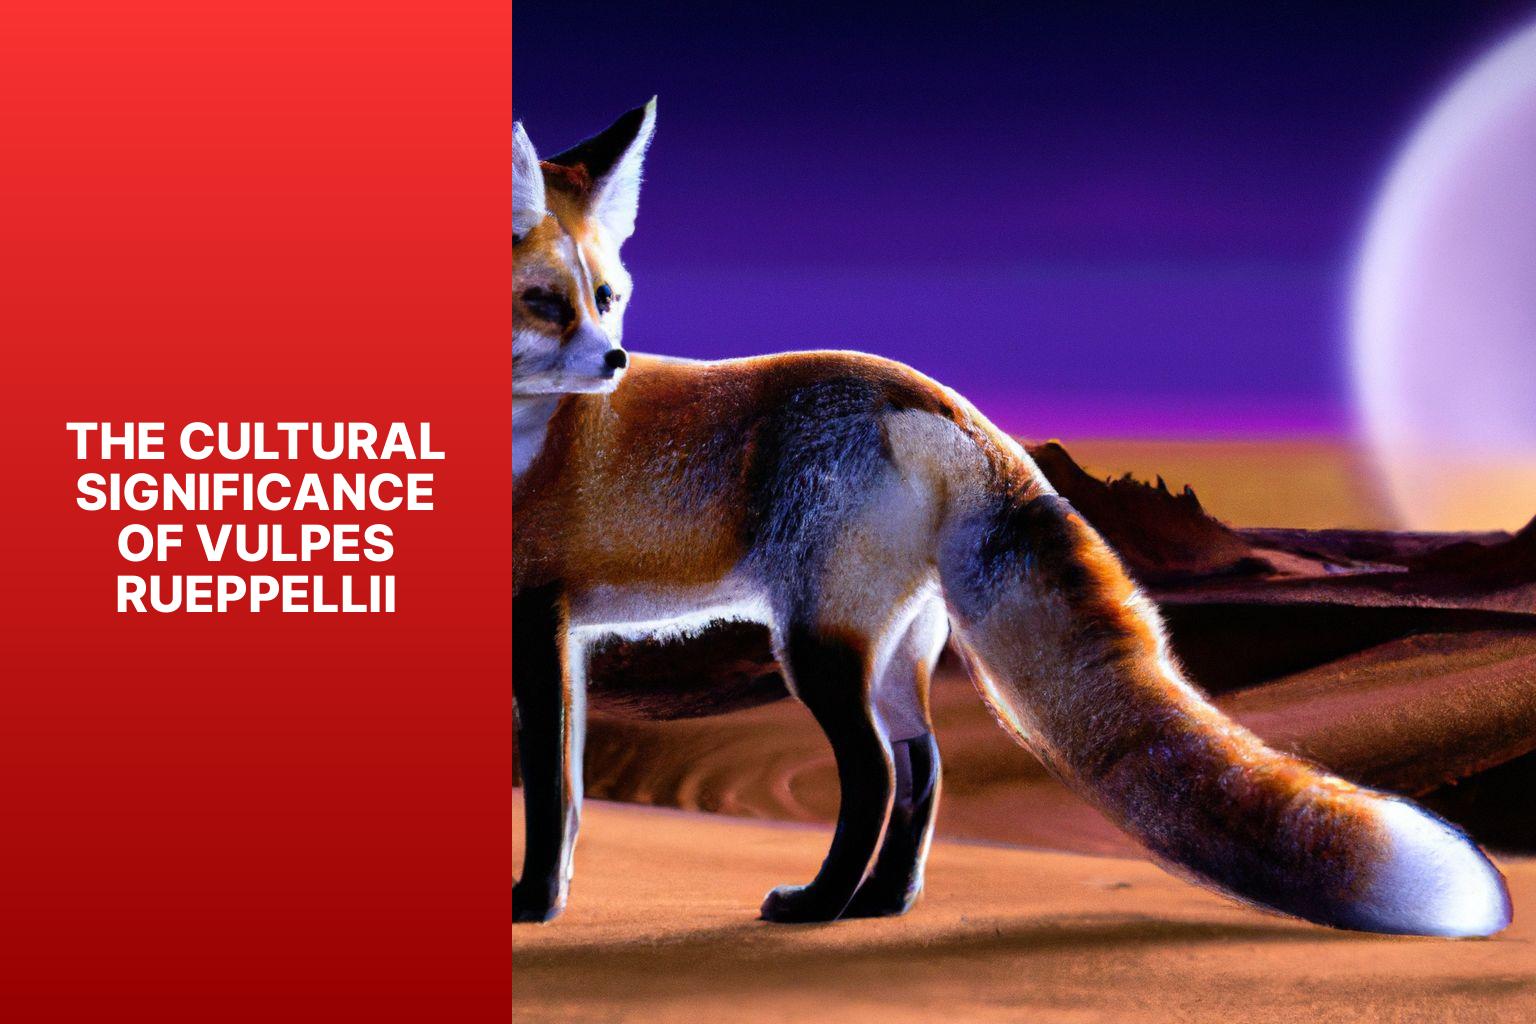 The Cultural Significance of Vulpes rueppellii - Vulpes rueppellii in Literature 